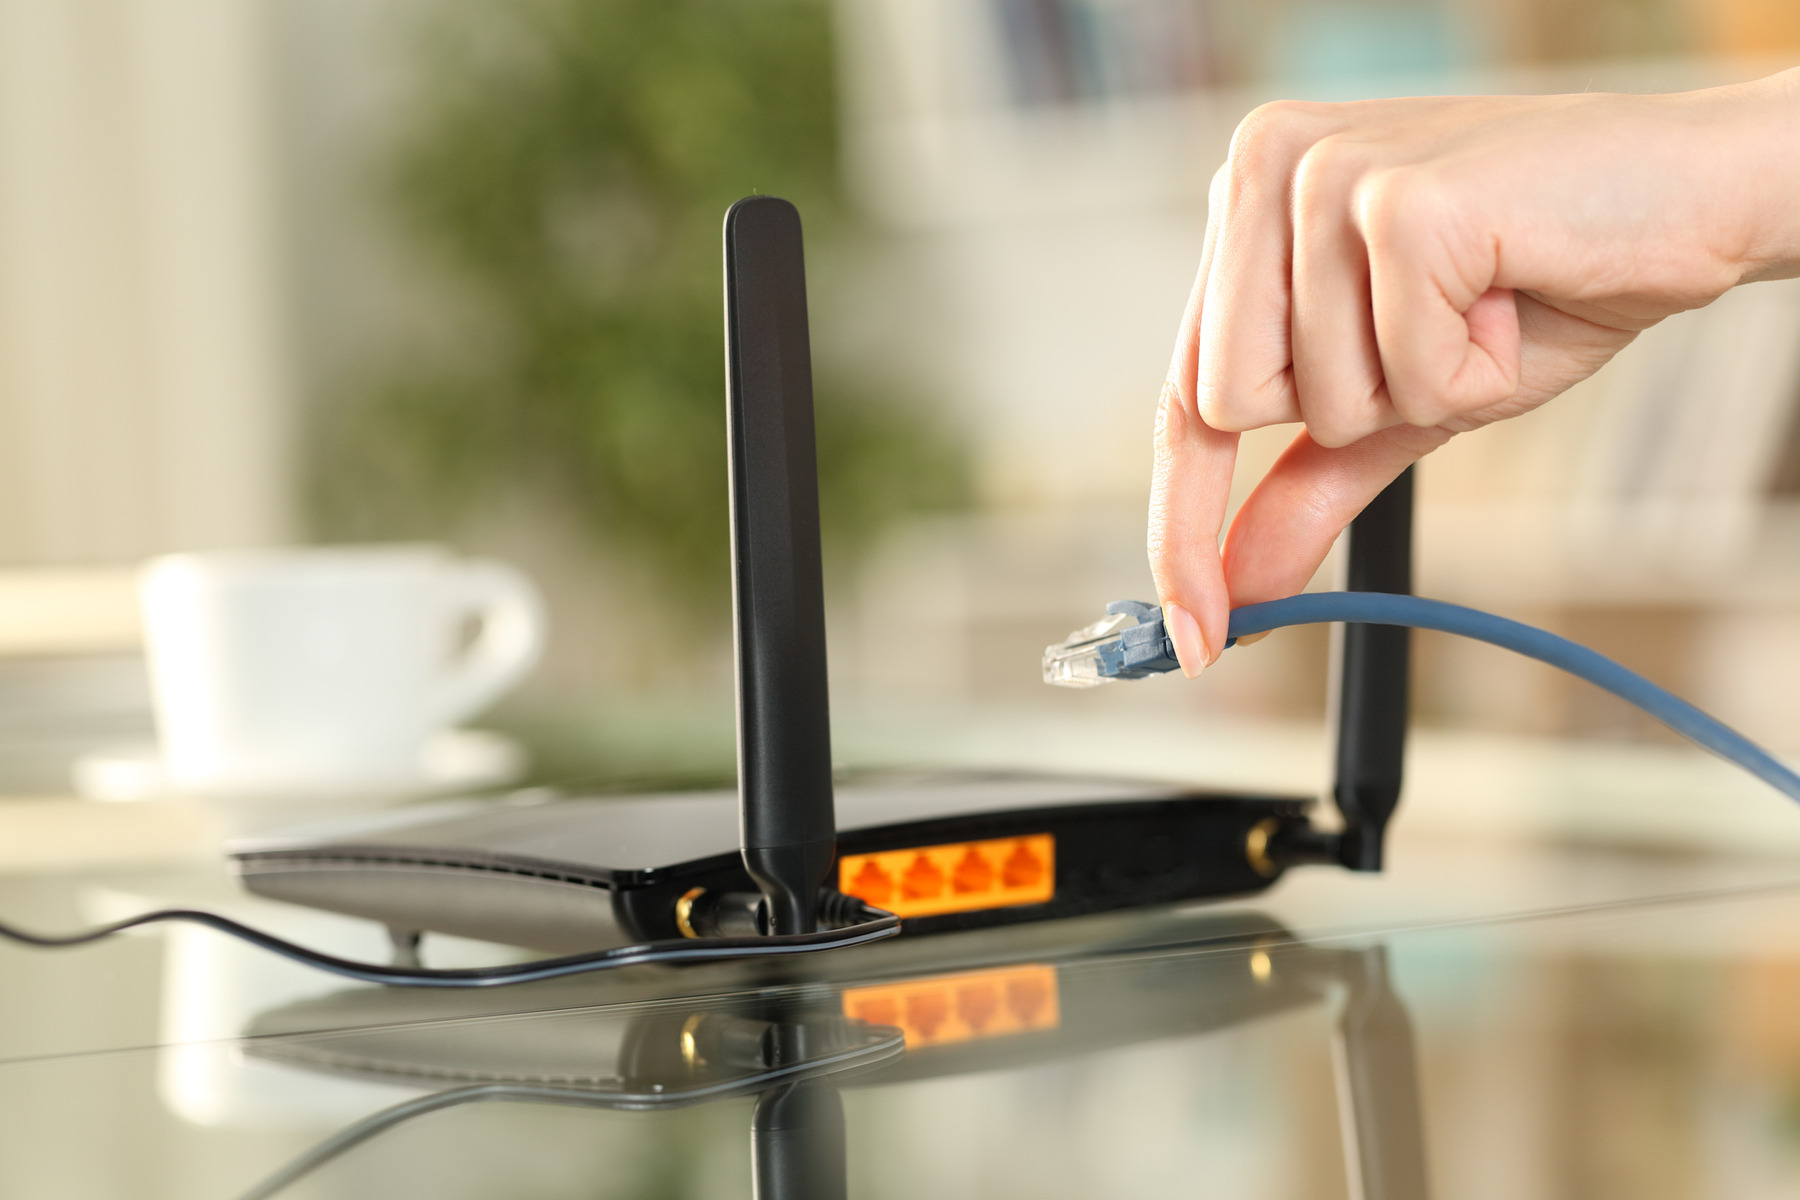 Where To Find Ssid On Wireless Router